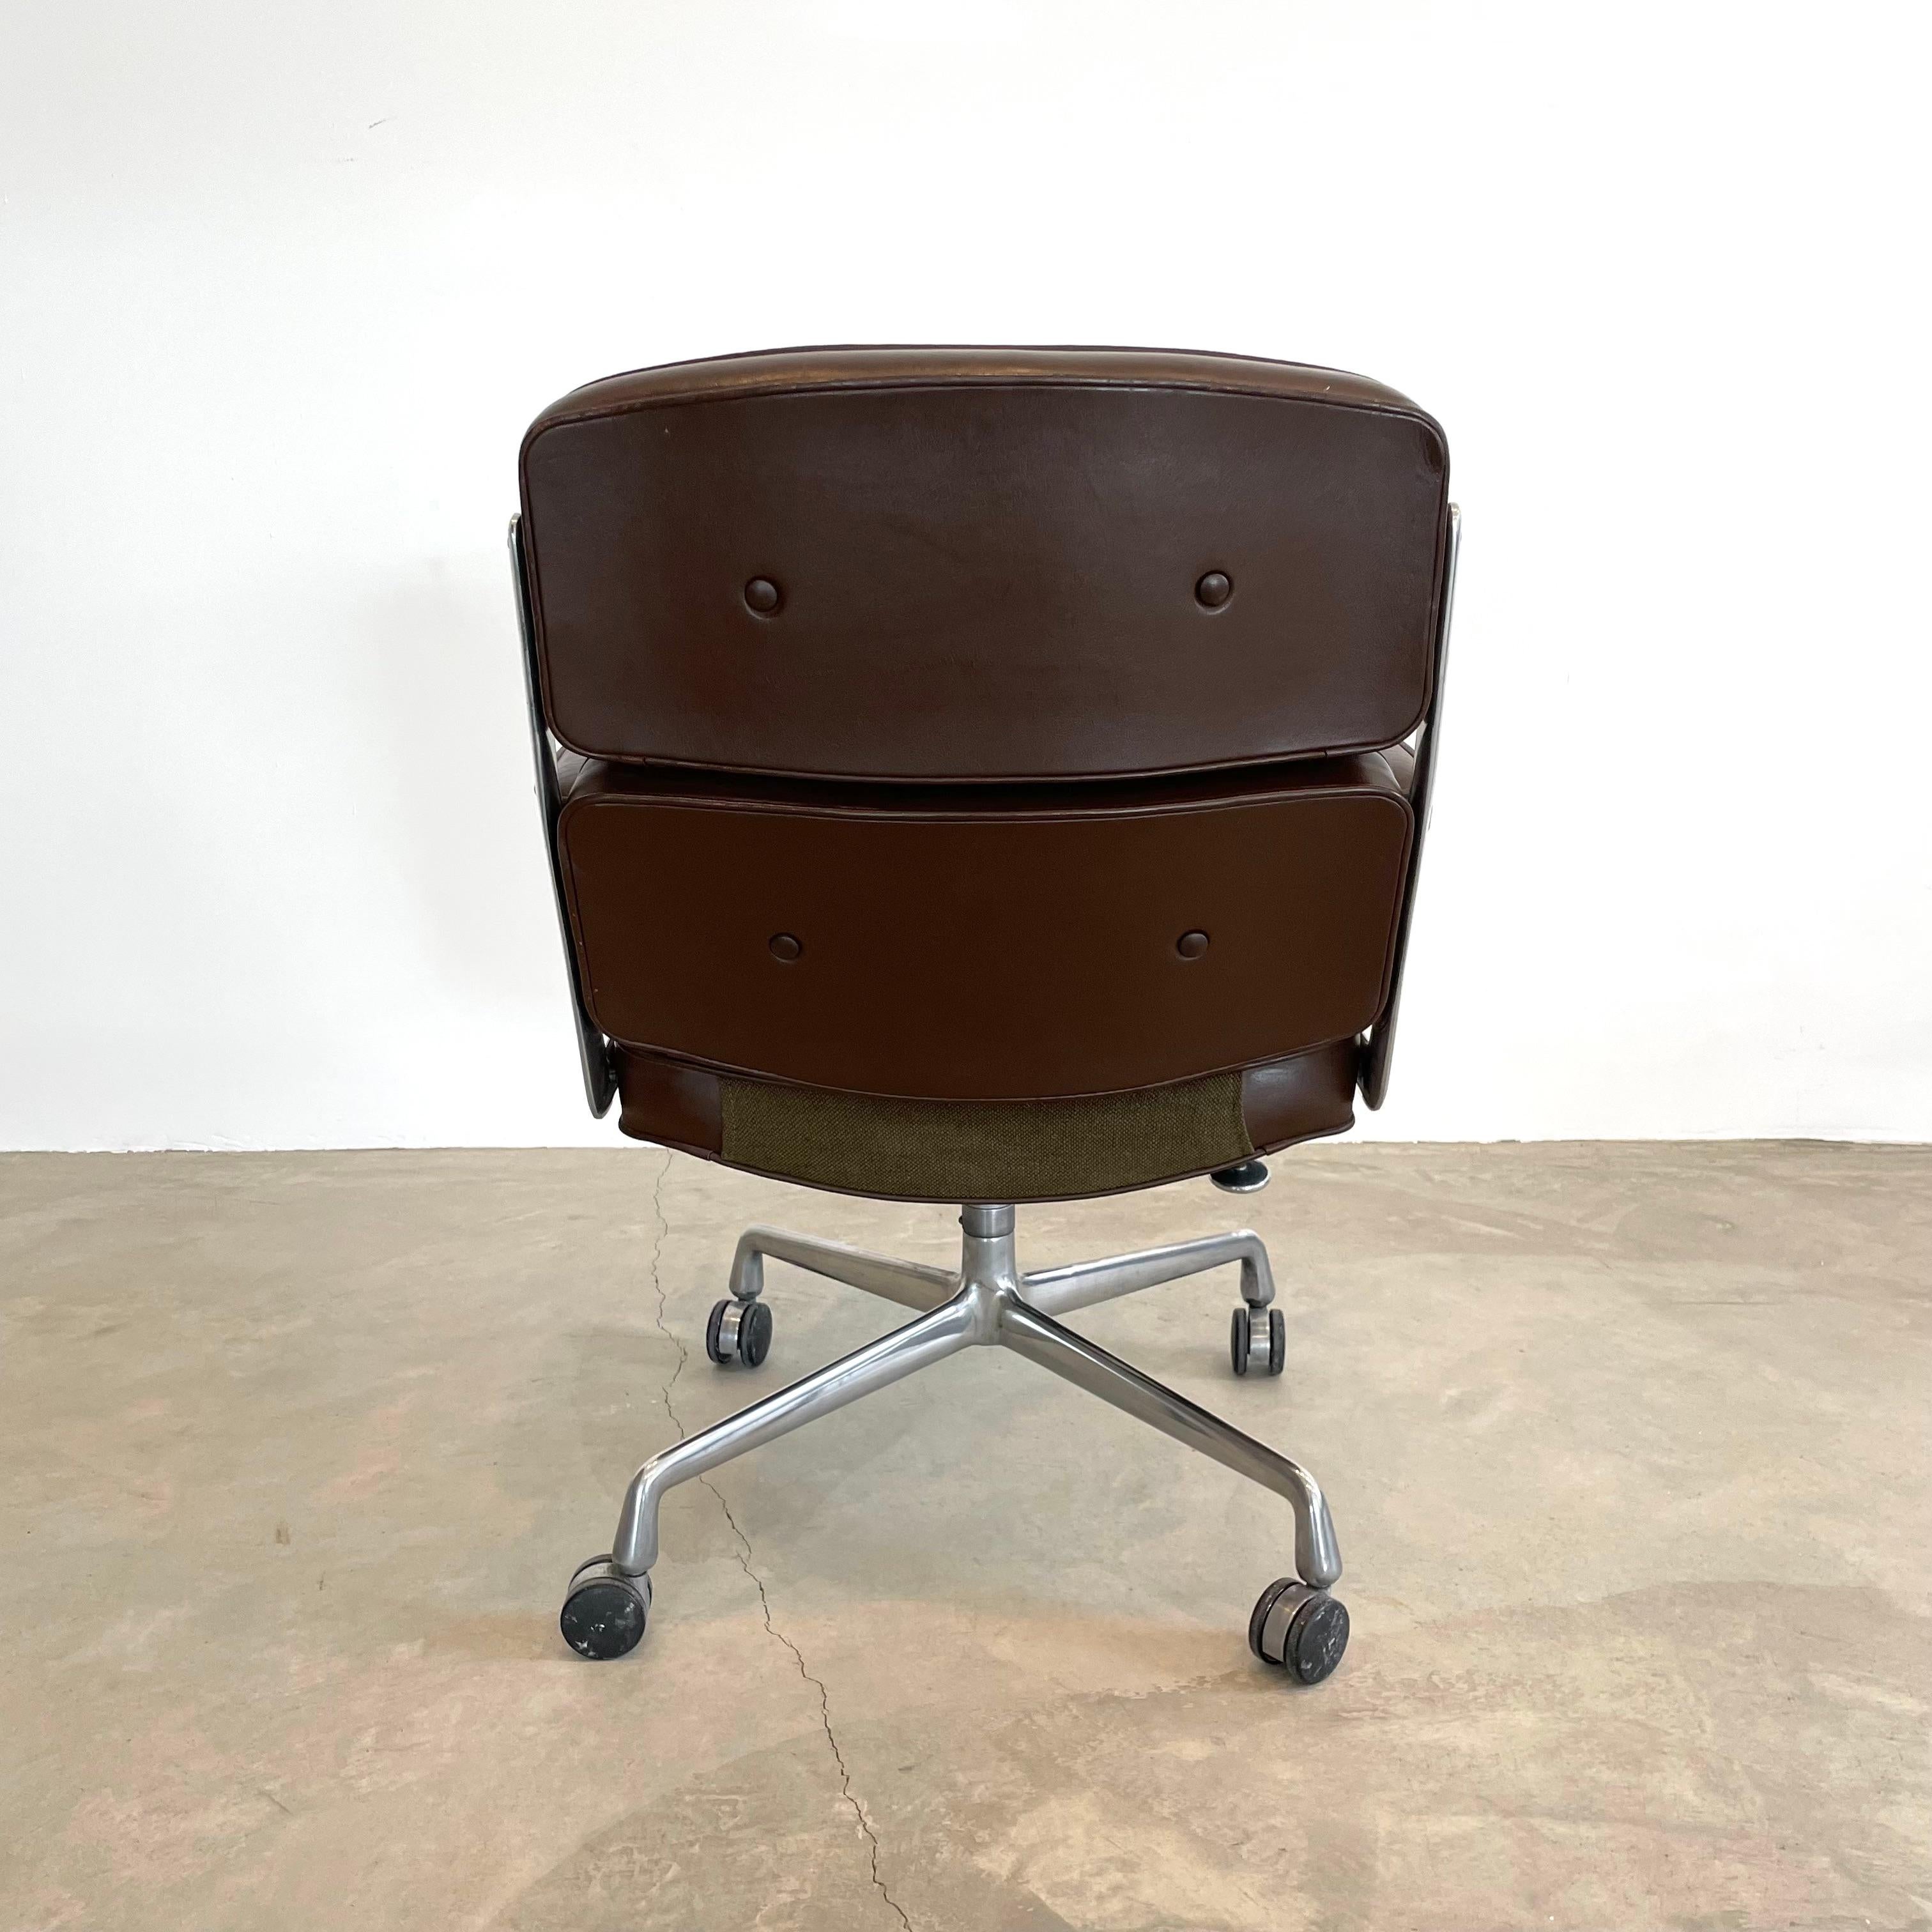 Eames Time Life Chair in Chocolate Leather for Herman Miller, 1978 USA For Sale 9